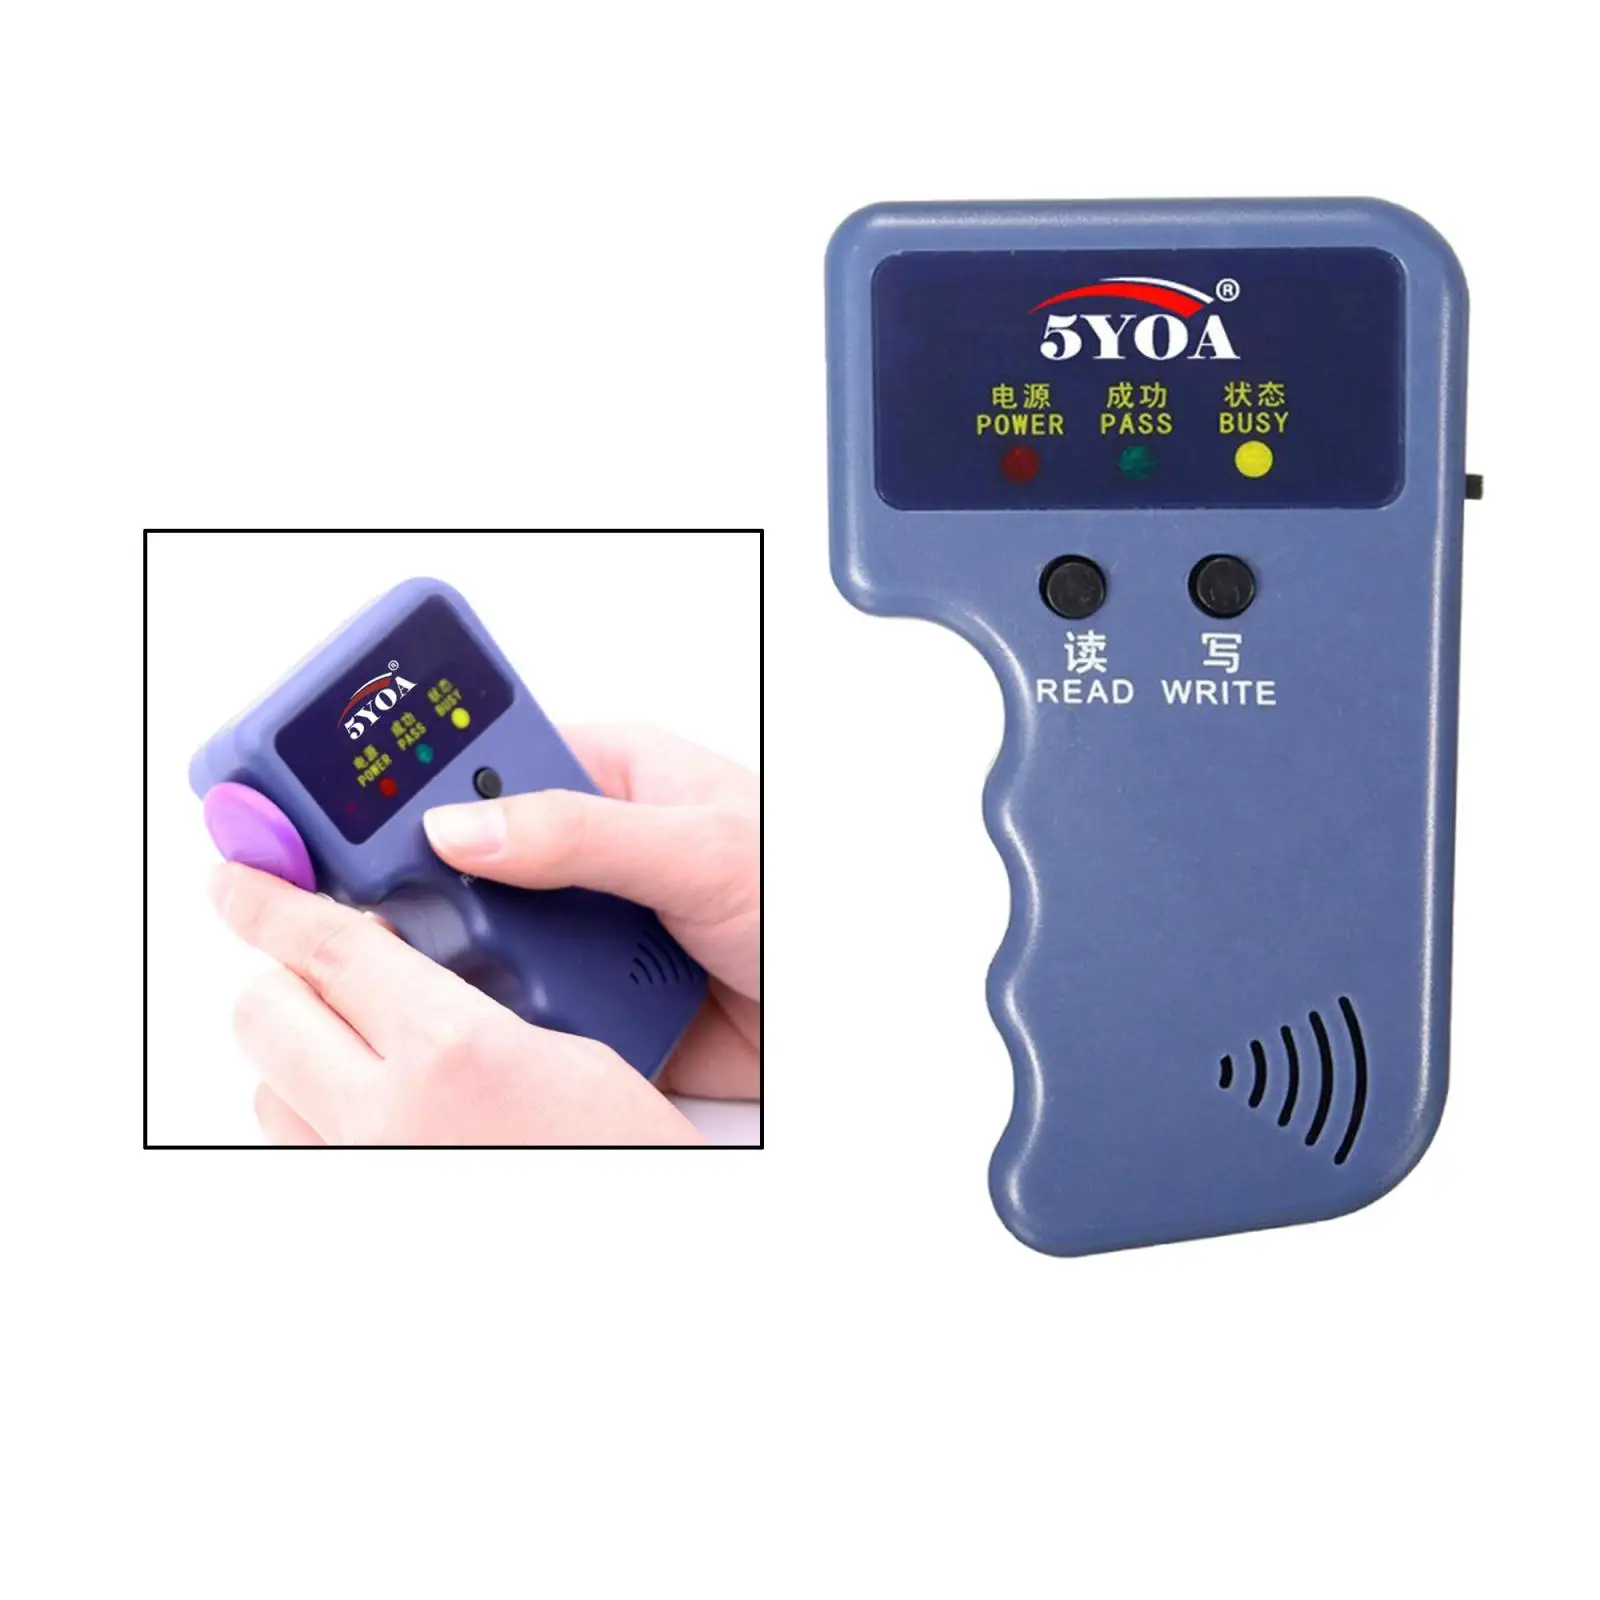 Homsafe Handheld Duplicator Programmer 125Khz RFID Card Reader Writer Rewritable ID Keyfob Small And Easy To Carry